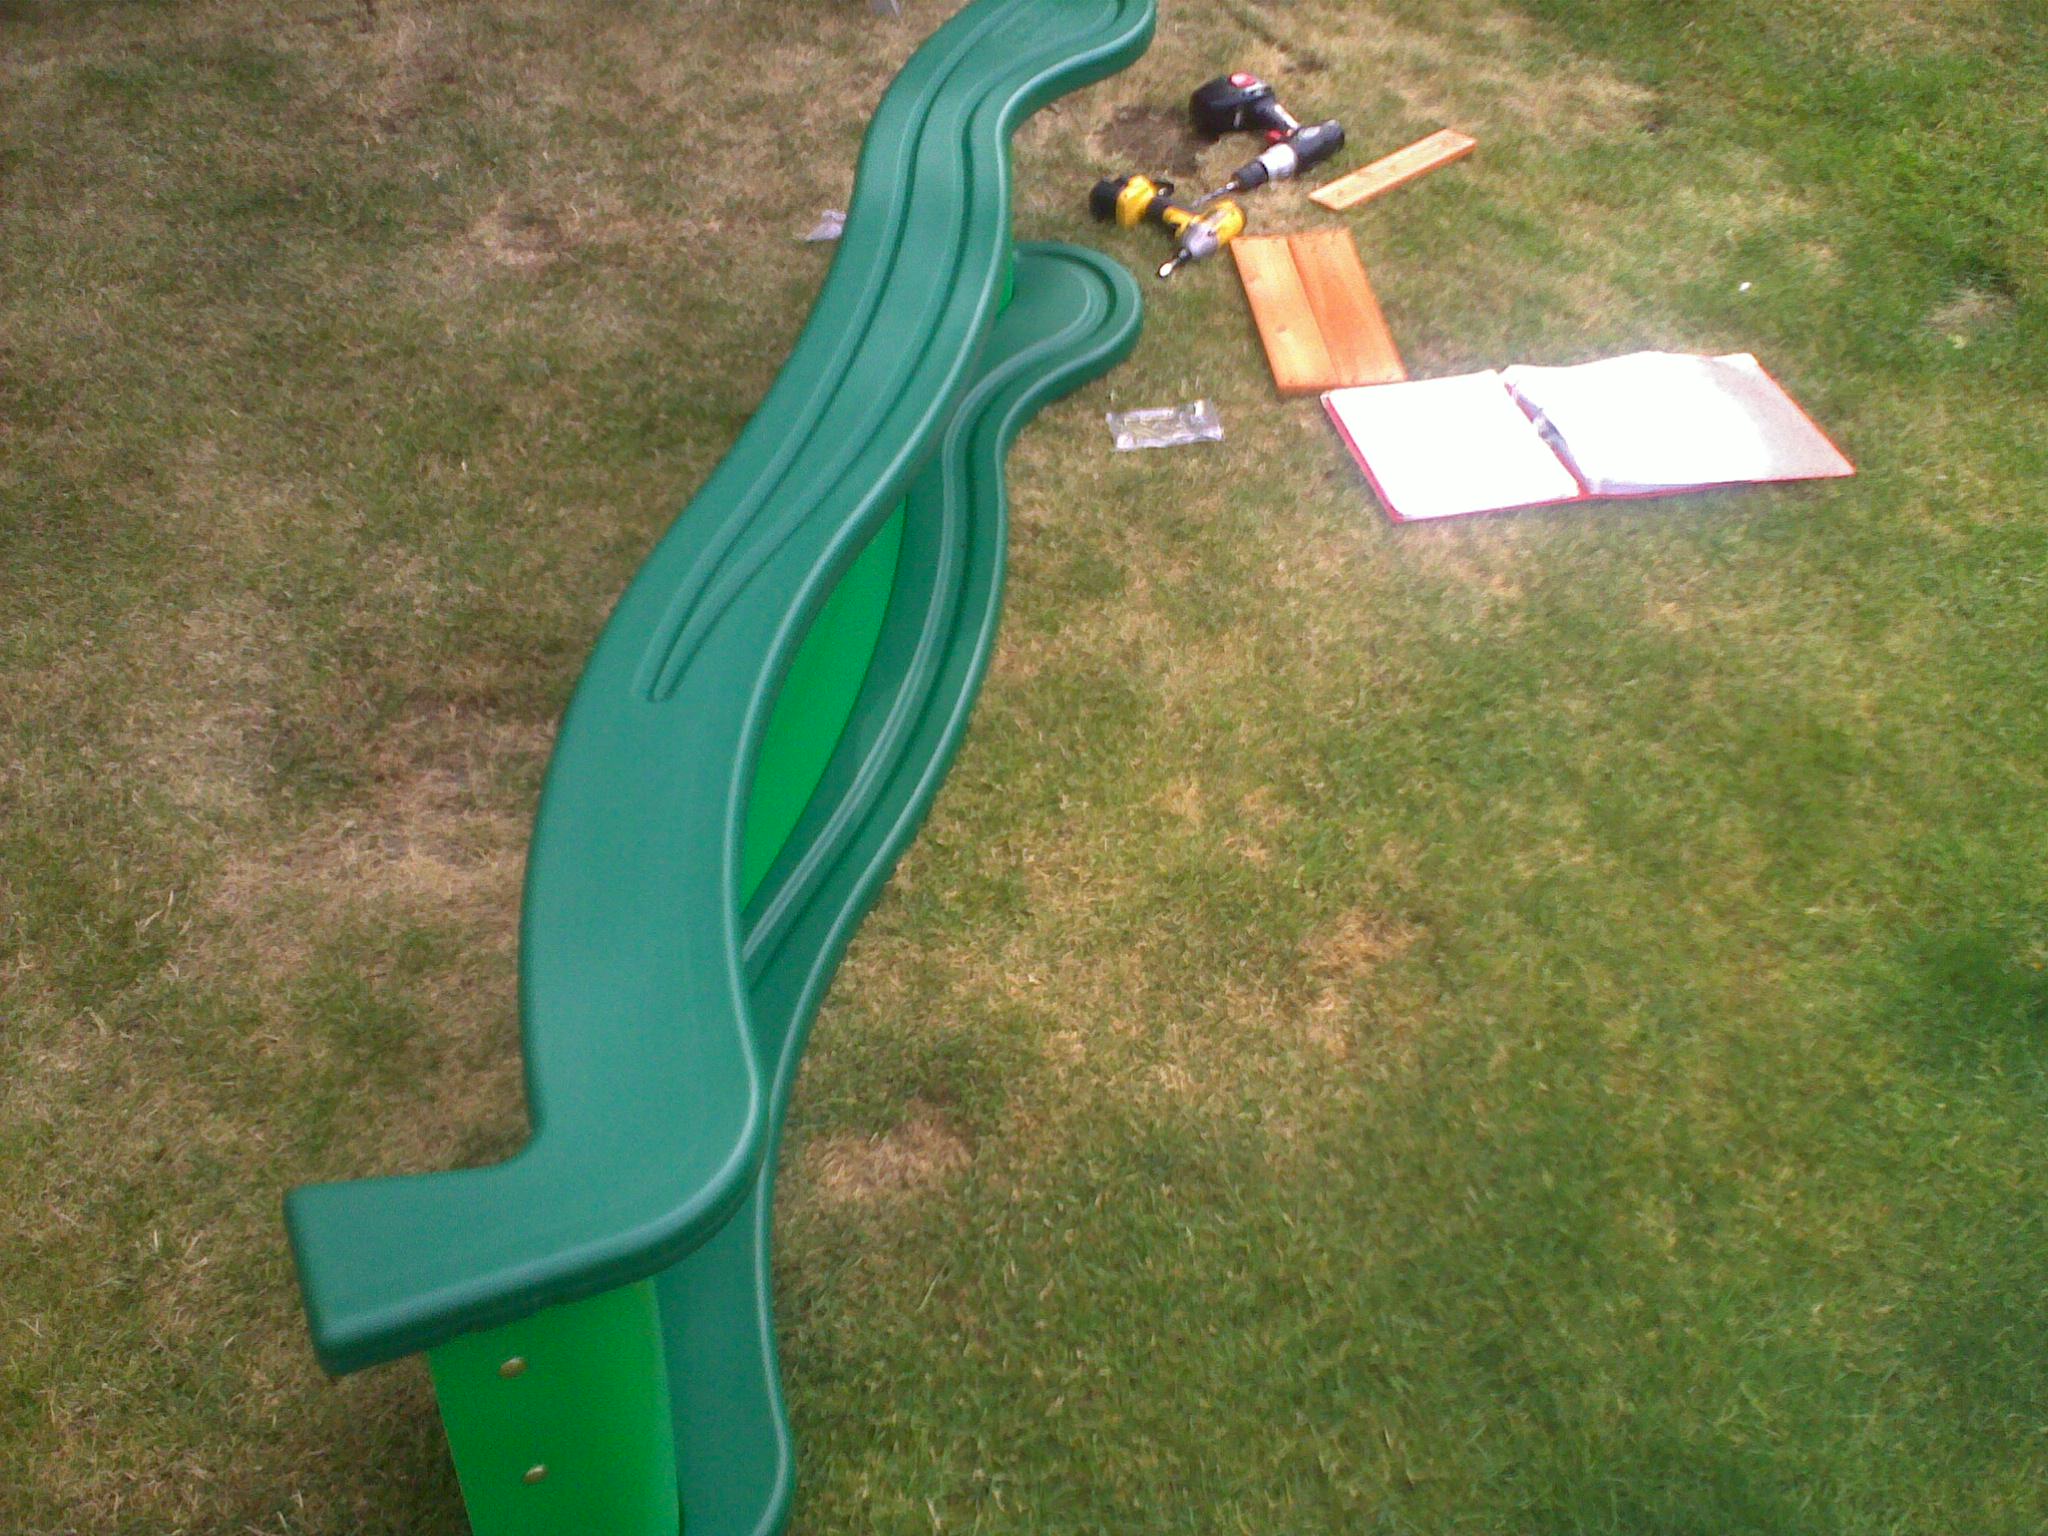 Building a Selwood Wavy Flat Pack Climbing Frame Slide